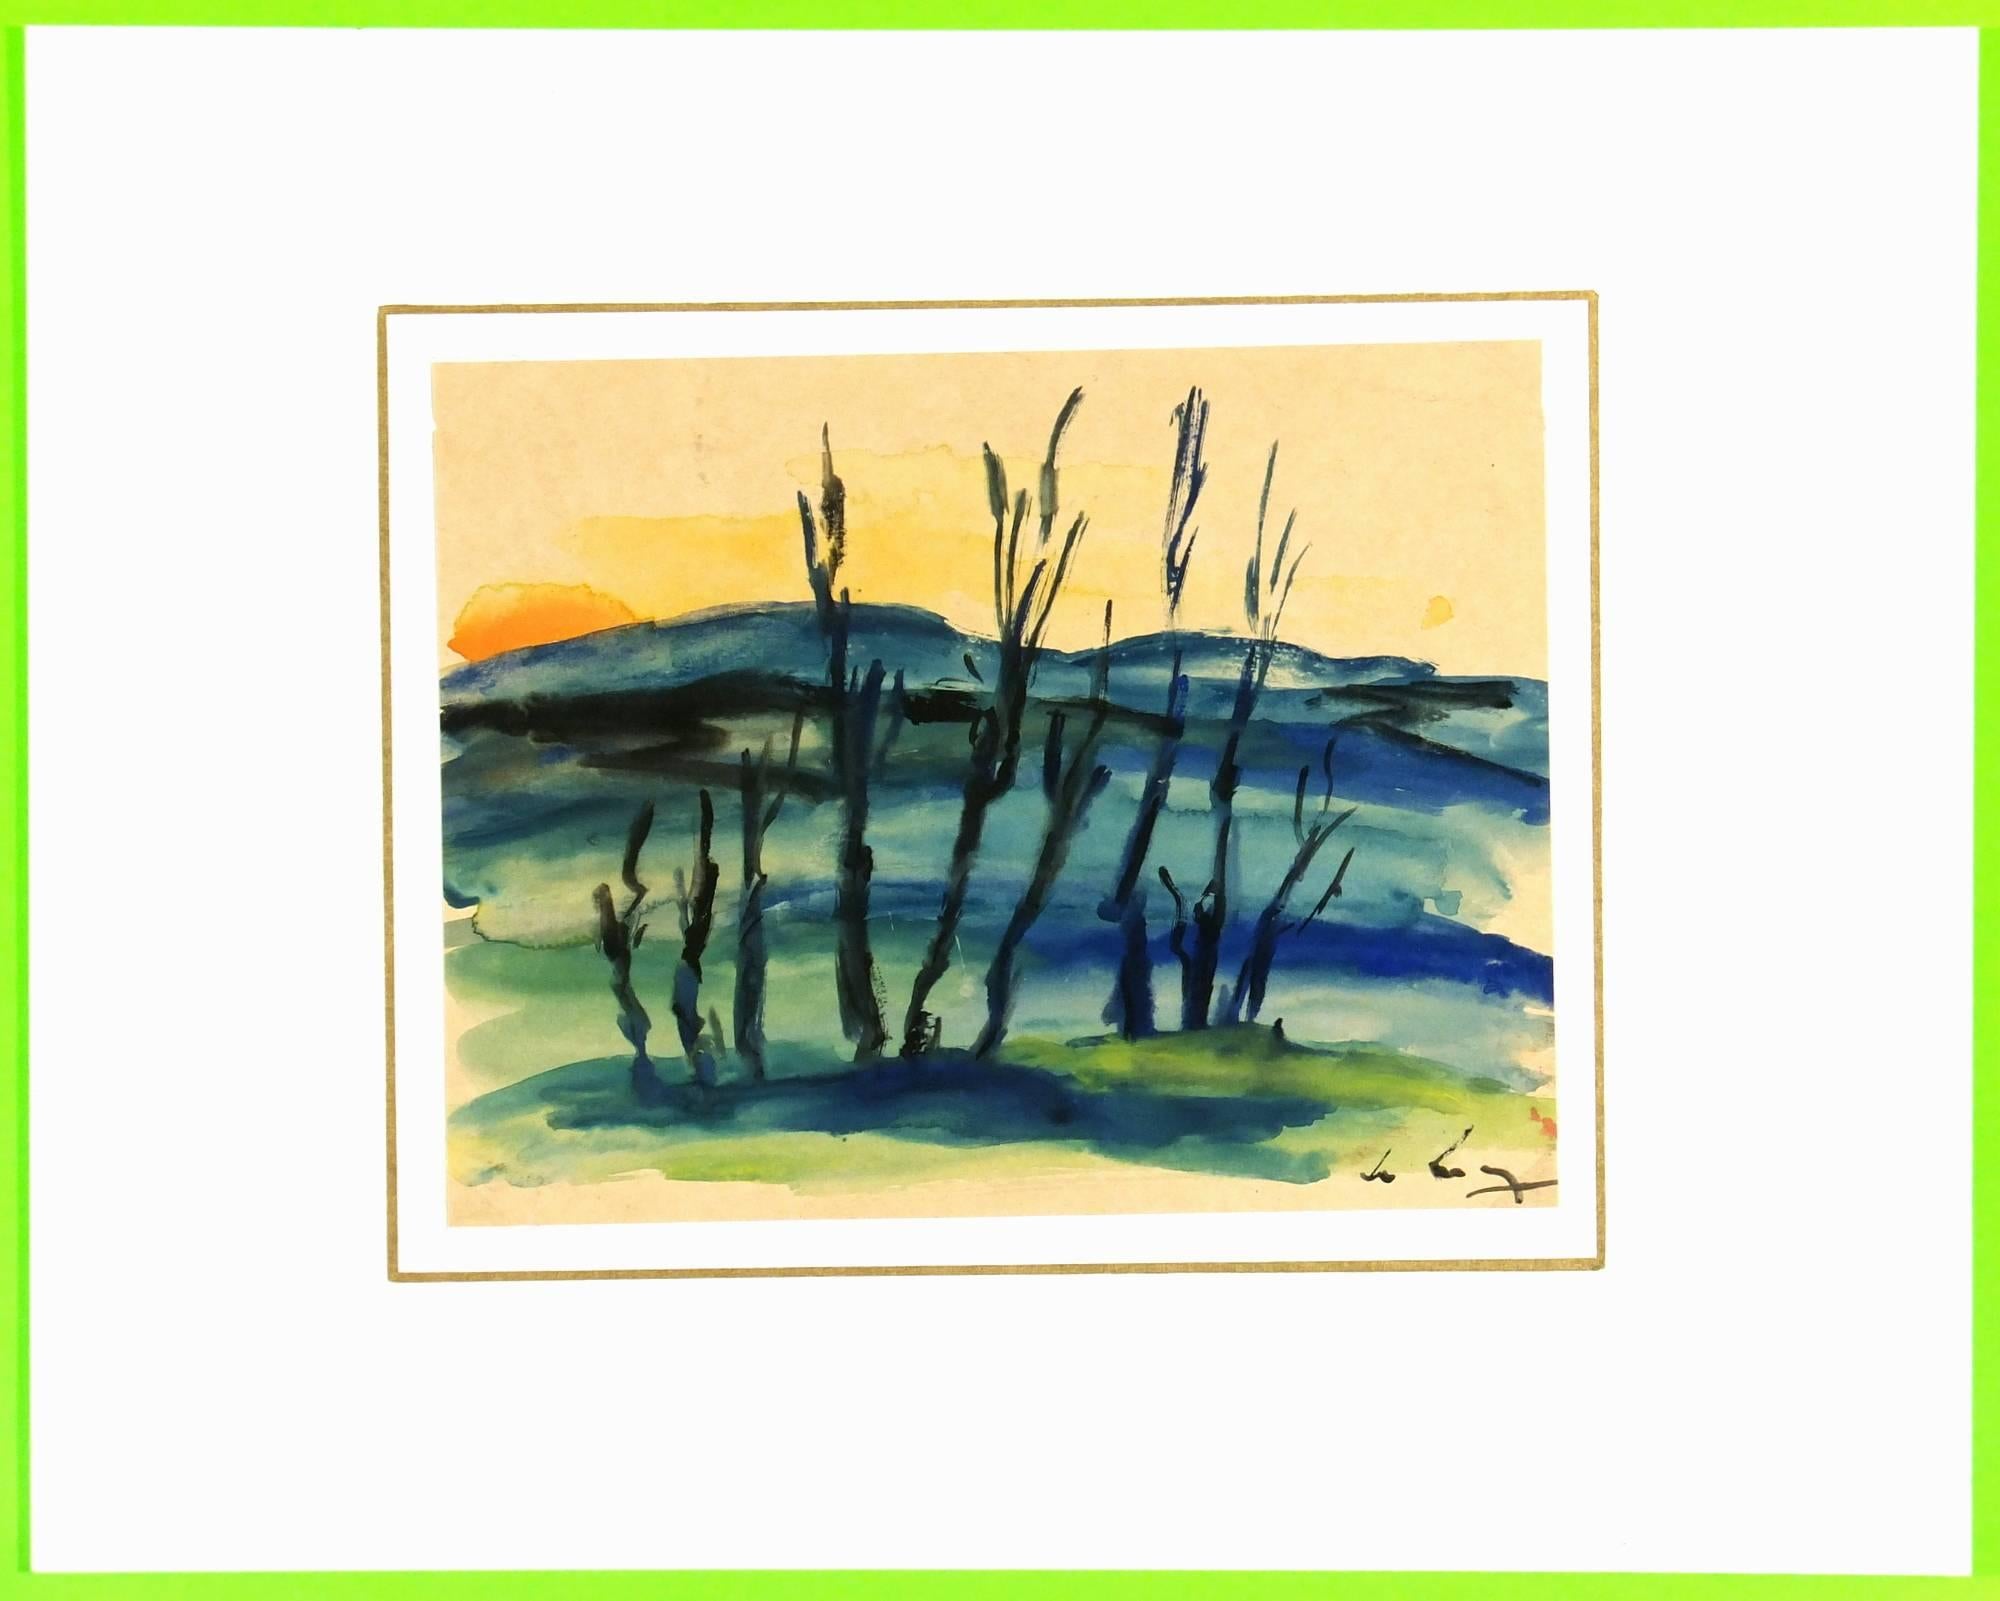 Hues of gold, blue, and green blend together in this arching landscape of trees against a setting sun, circa 1980. Signed lower right.

Original artwork on paper displayed on a white mat with a gold border. Mat fits a standard-size frame.  Archival